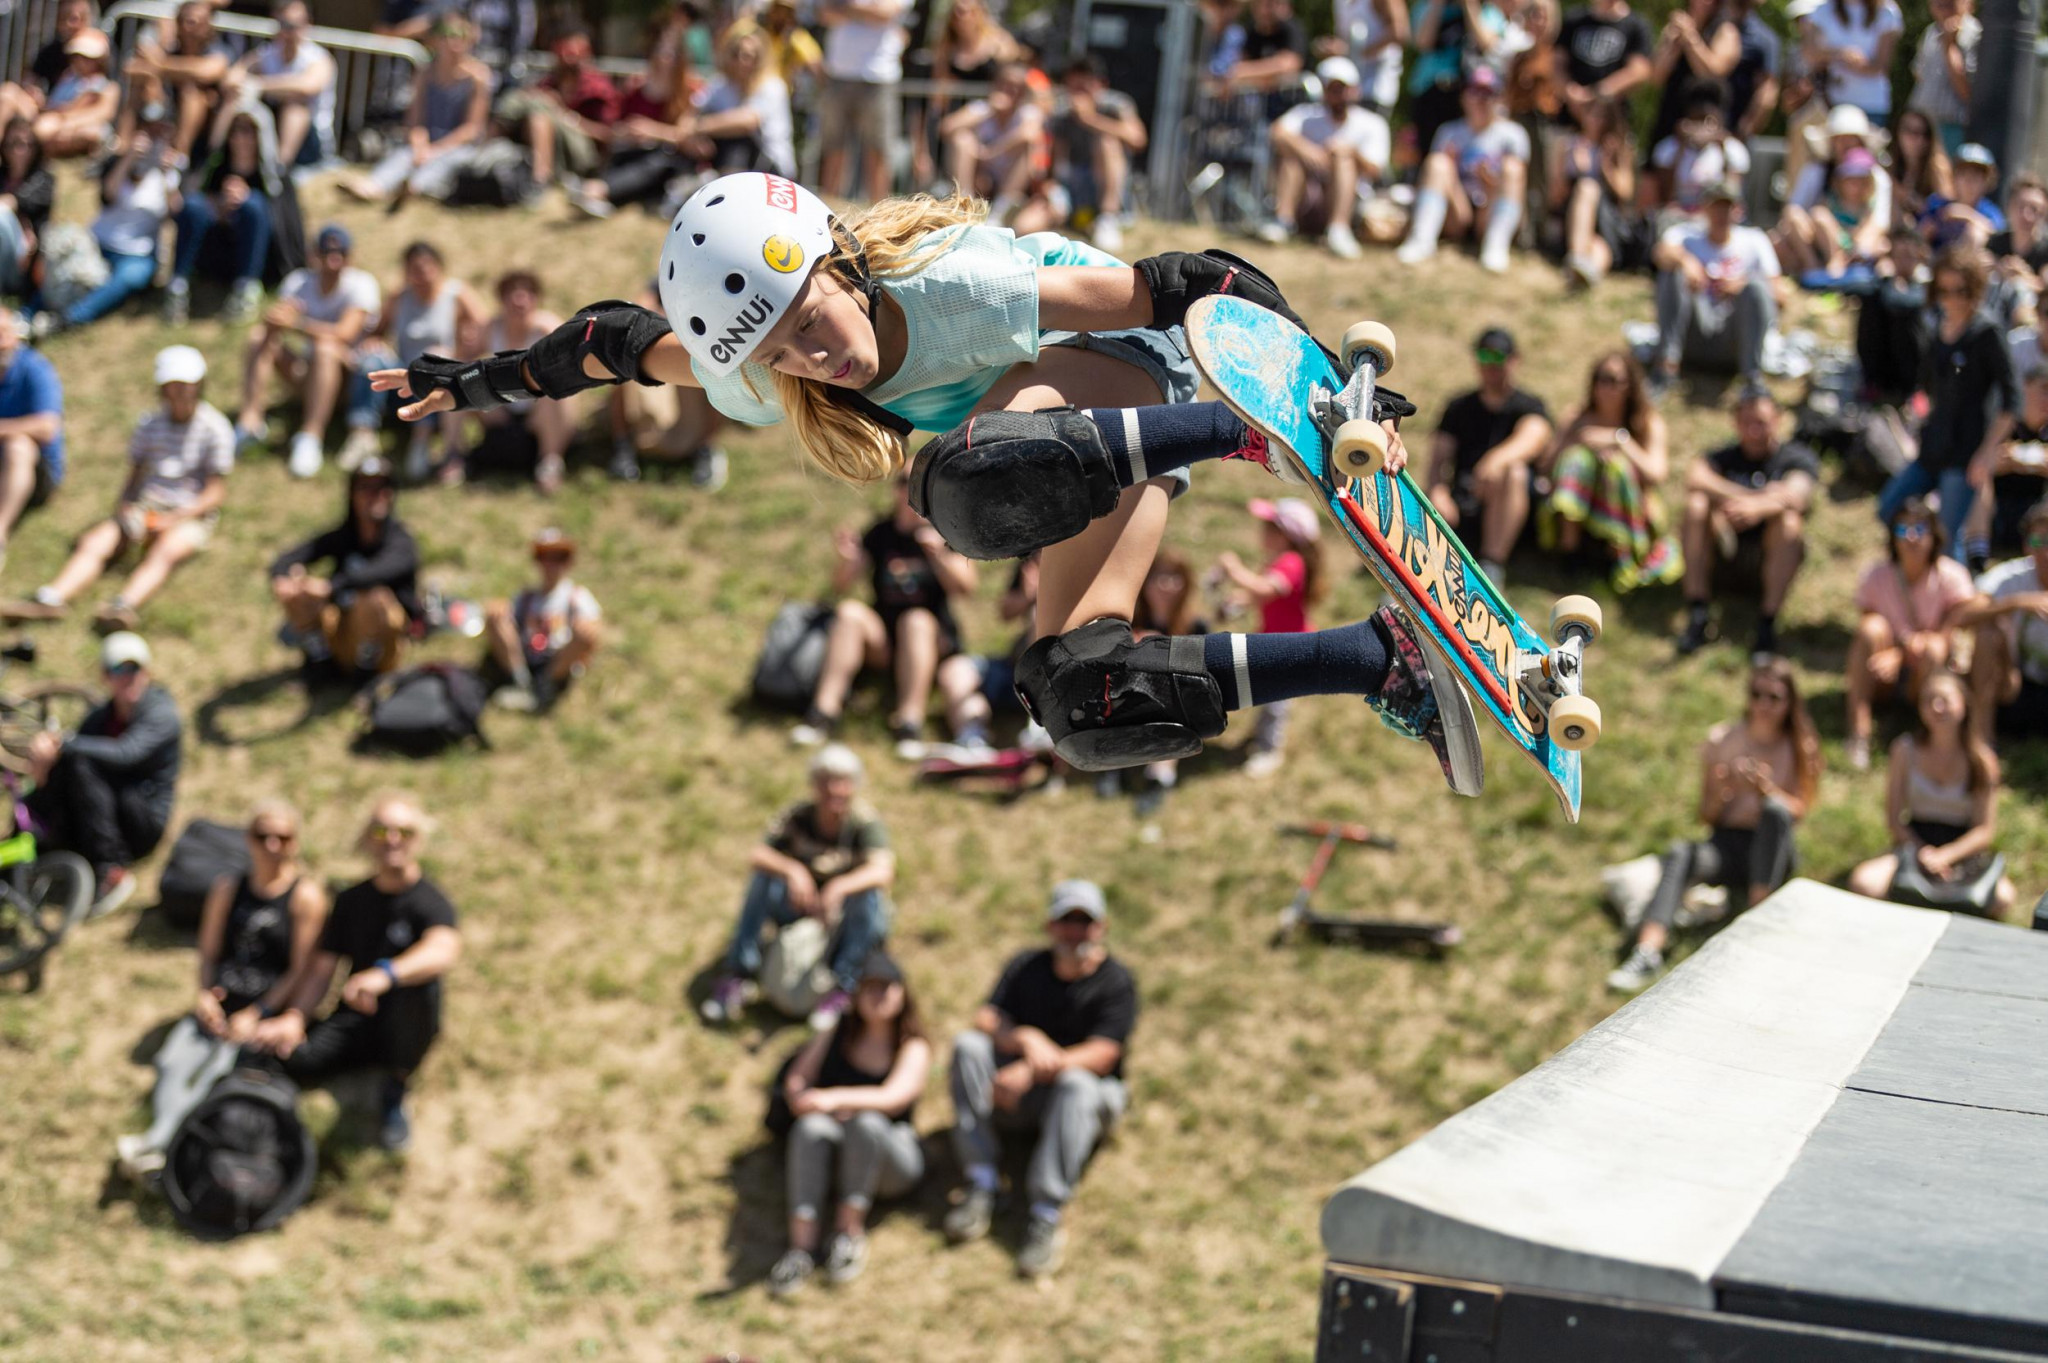 The women's street skateboarding discipline is set to be the first professional final to take place at FISE 2022, with the first runs scheduled in the morning ©Hurricane - FISE